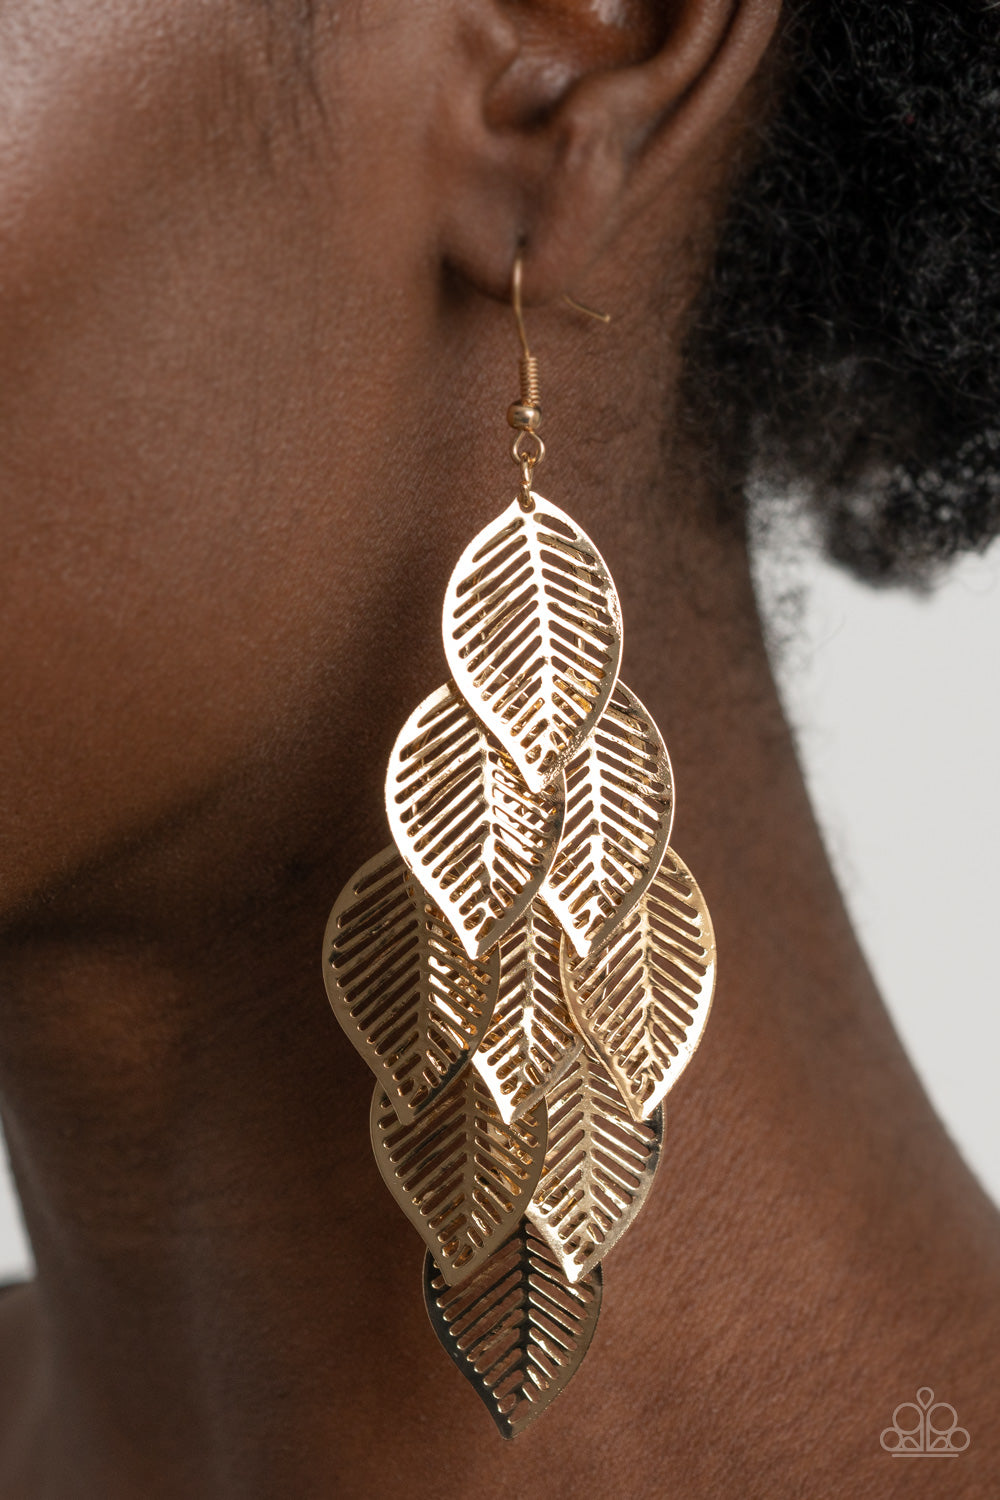 Limitlessly Leafy - Gold earrings Paparazzi